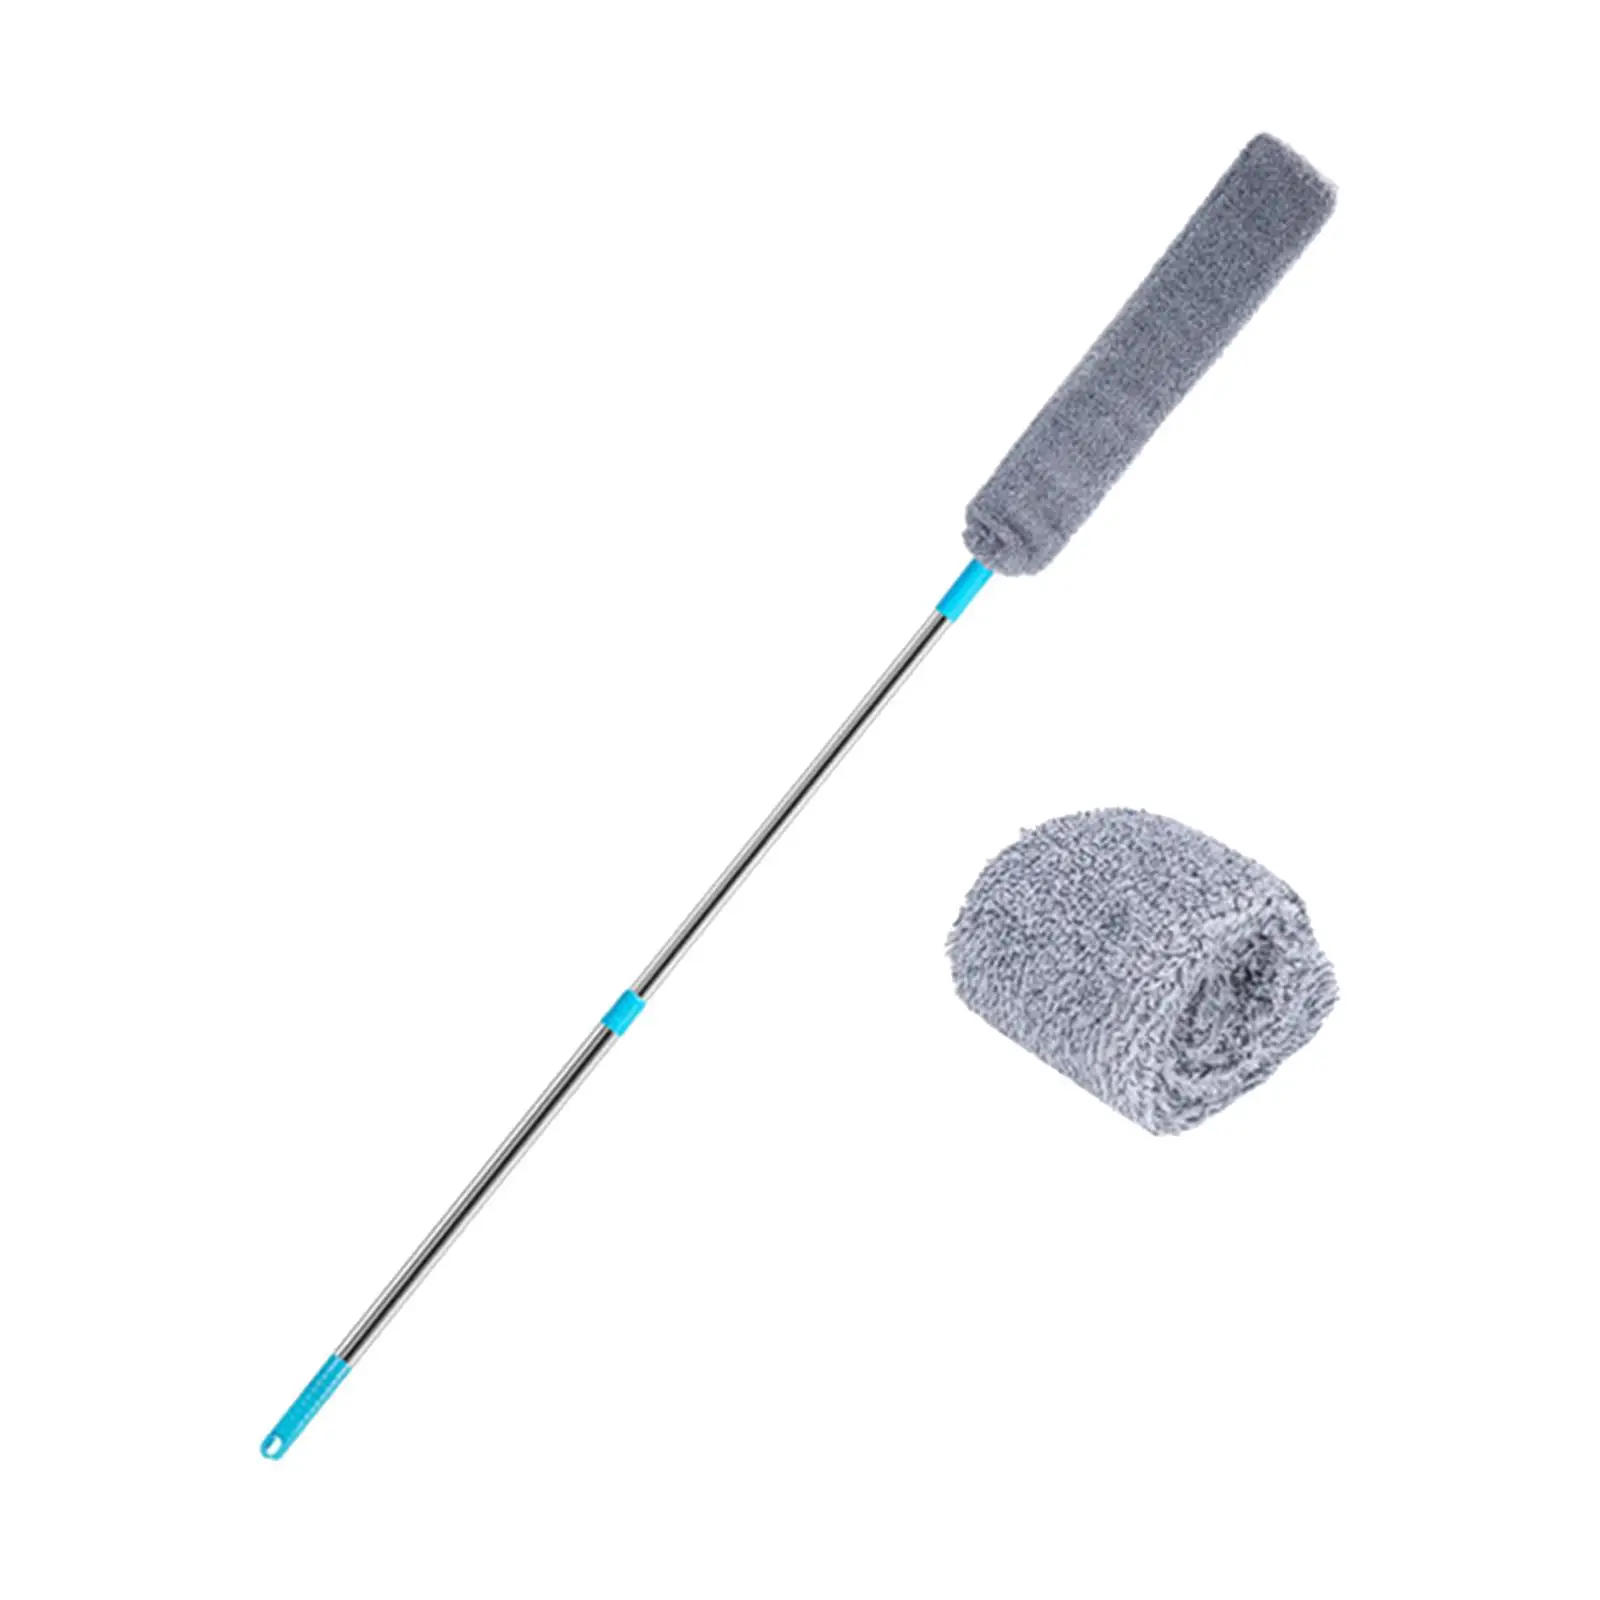 Retractable Crevice Dust Cleaner Flat Crevice Cleaning Brush Microfiber Duster for Fridge